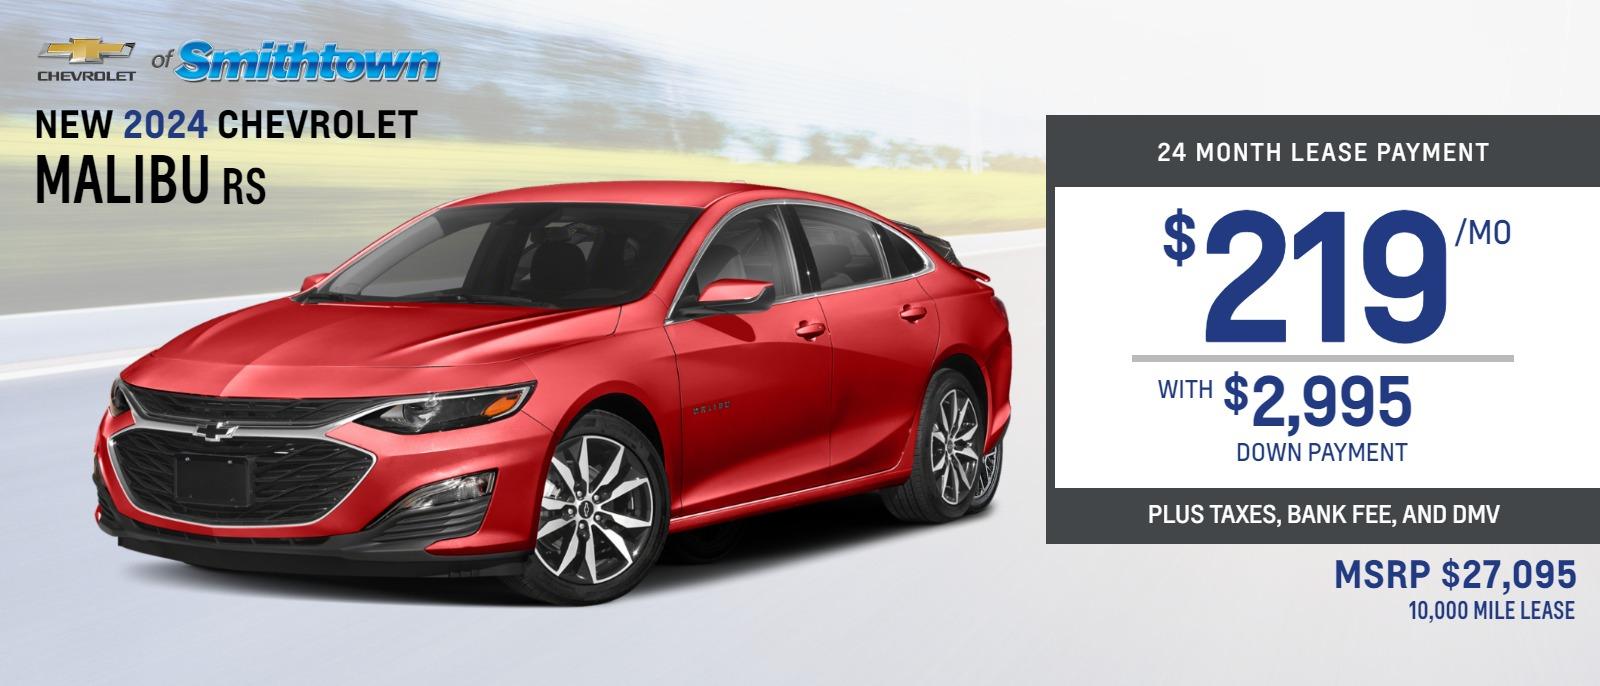 2024 Chevrolet Malibu RS
MSRP $27,095.
24 months
10k
$219. month
$2,995. down, taxes, bank fee and DMV